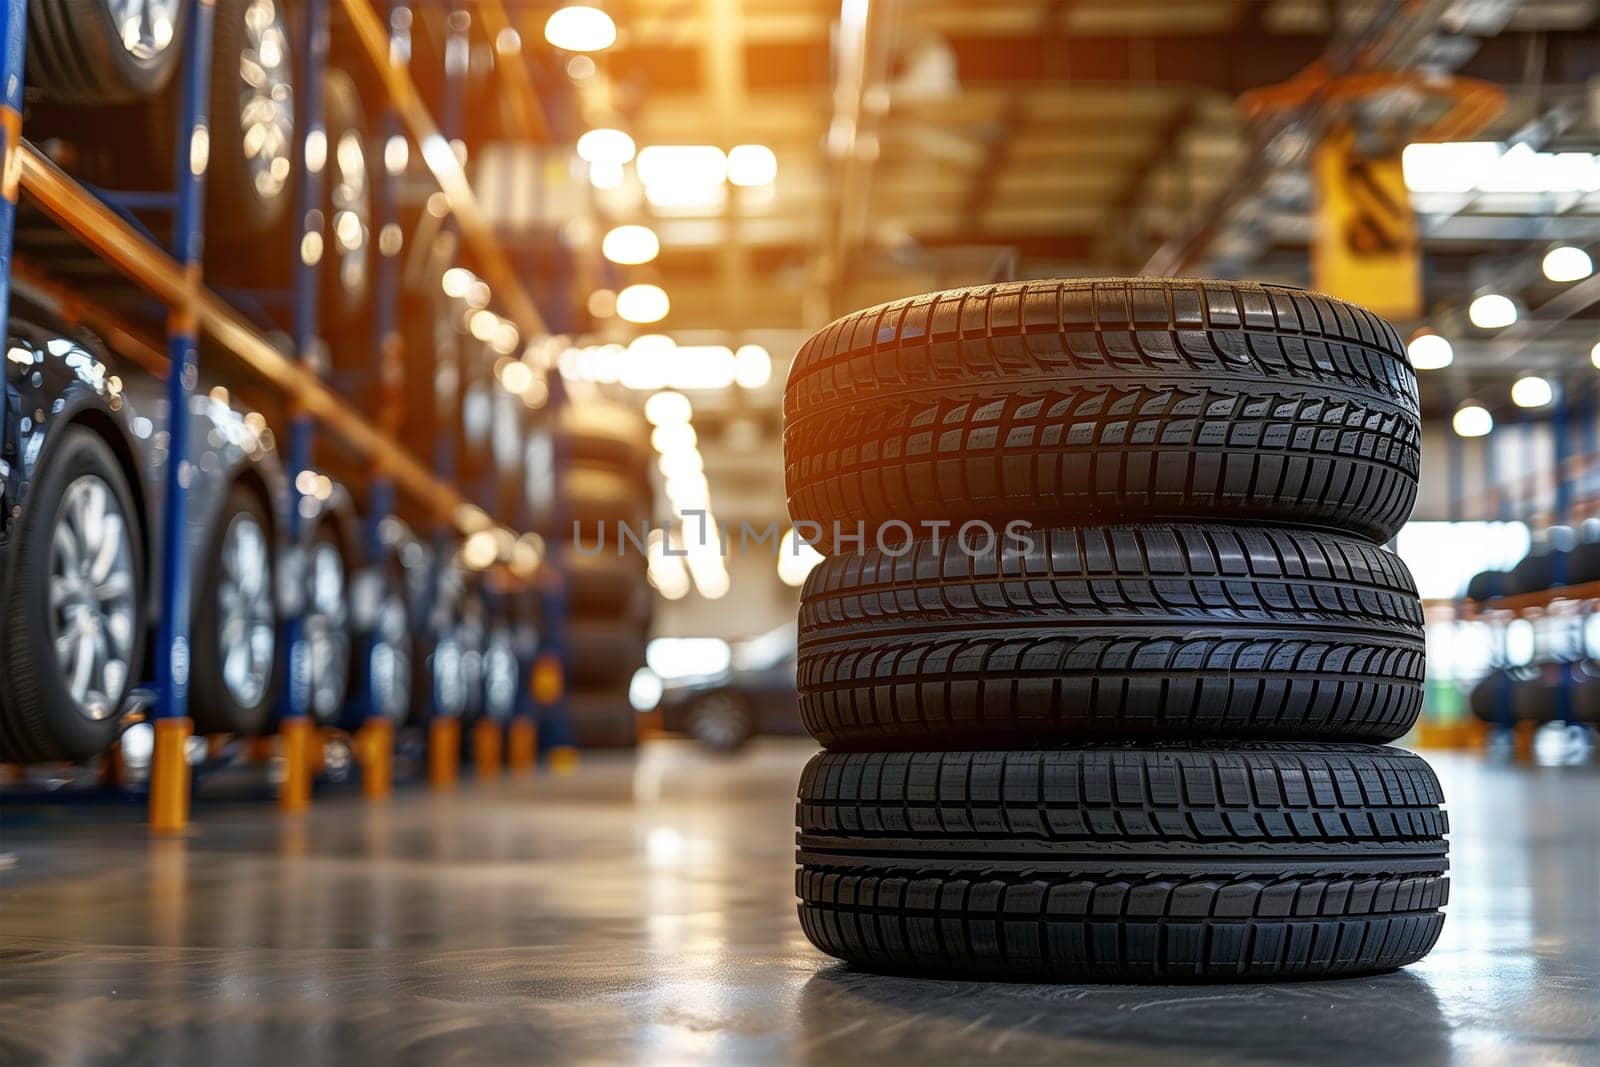 A neat stack of tires stored in a warehouse, showcasing various sizes and treads for distribution or sale.